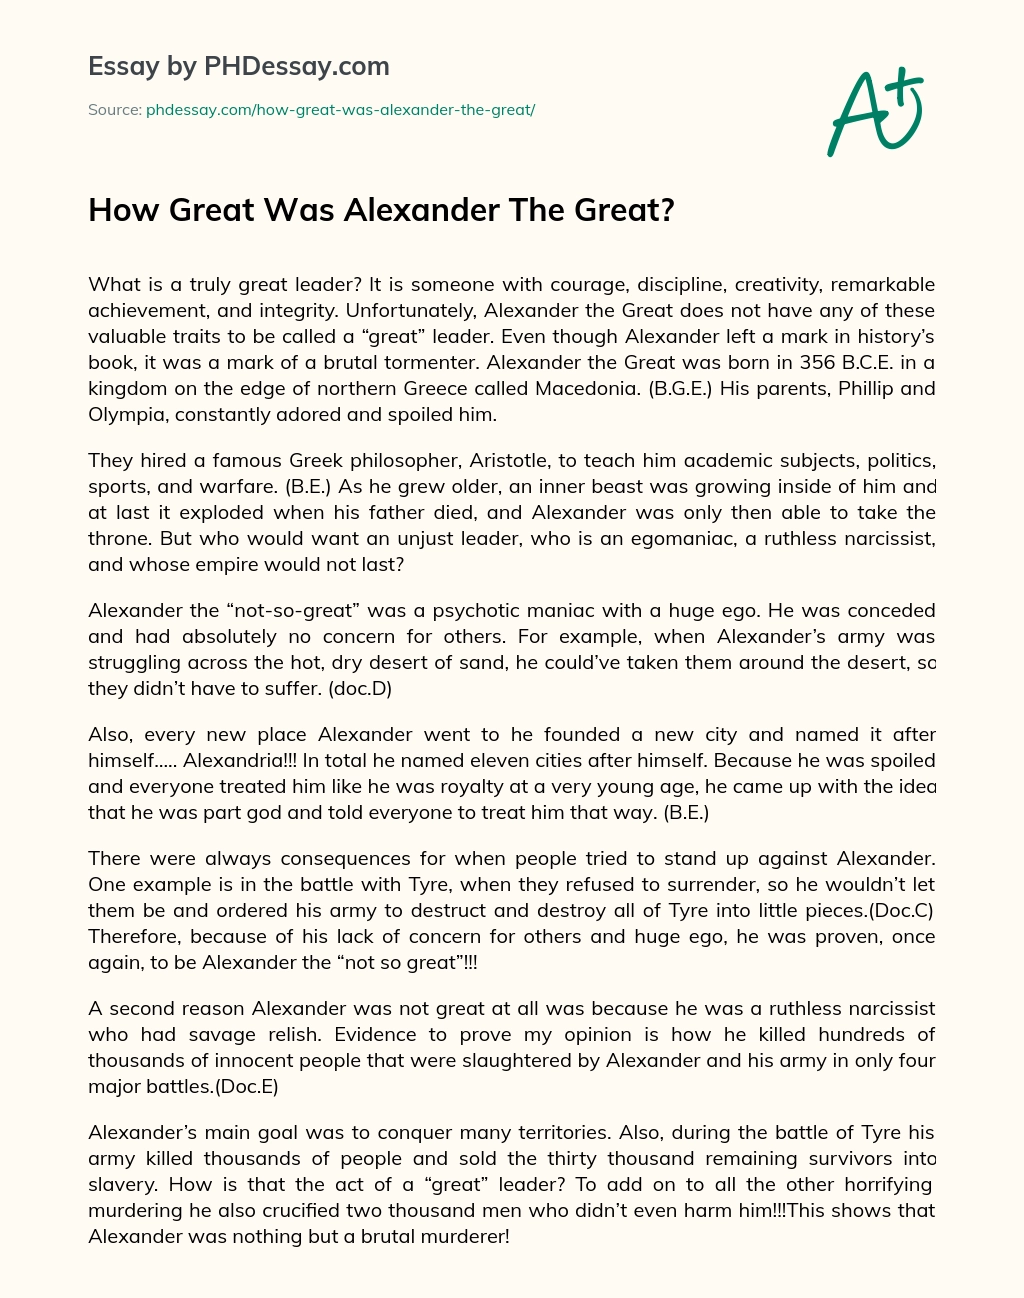 How Great Was Alexander The Great? essay